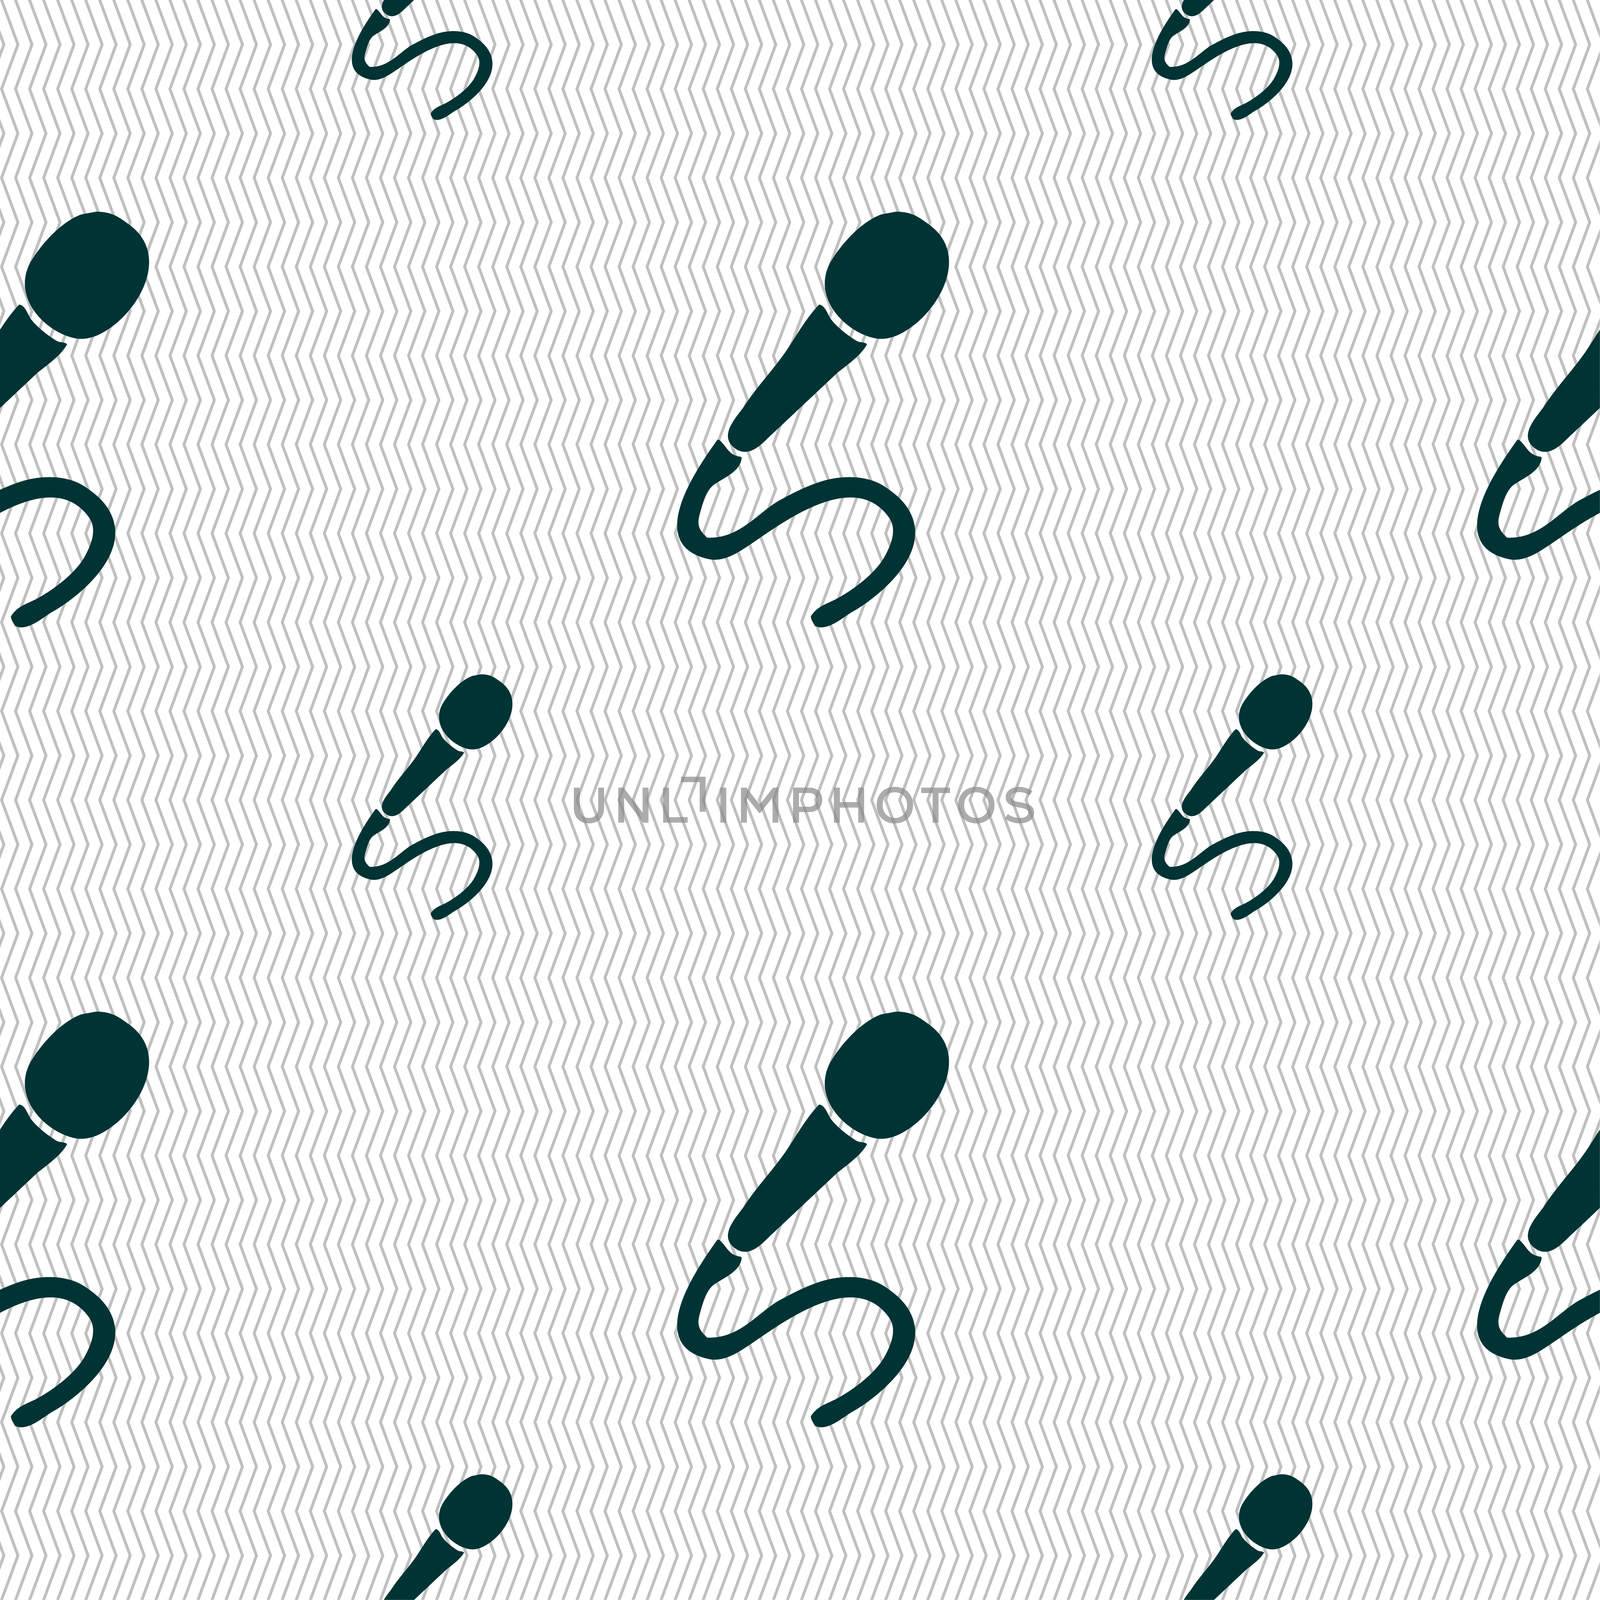 microphone icon sign. Seamless pattern with geometric texture. illustration